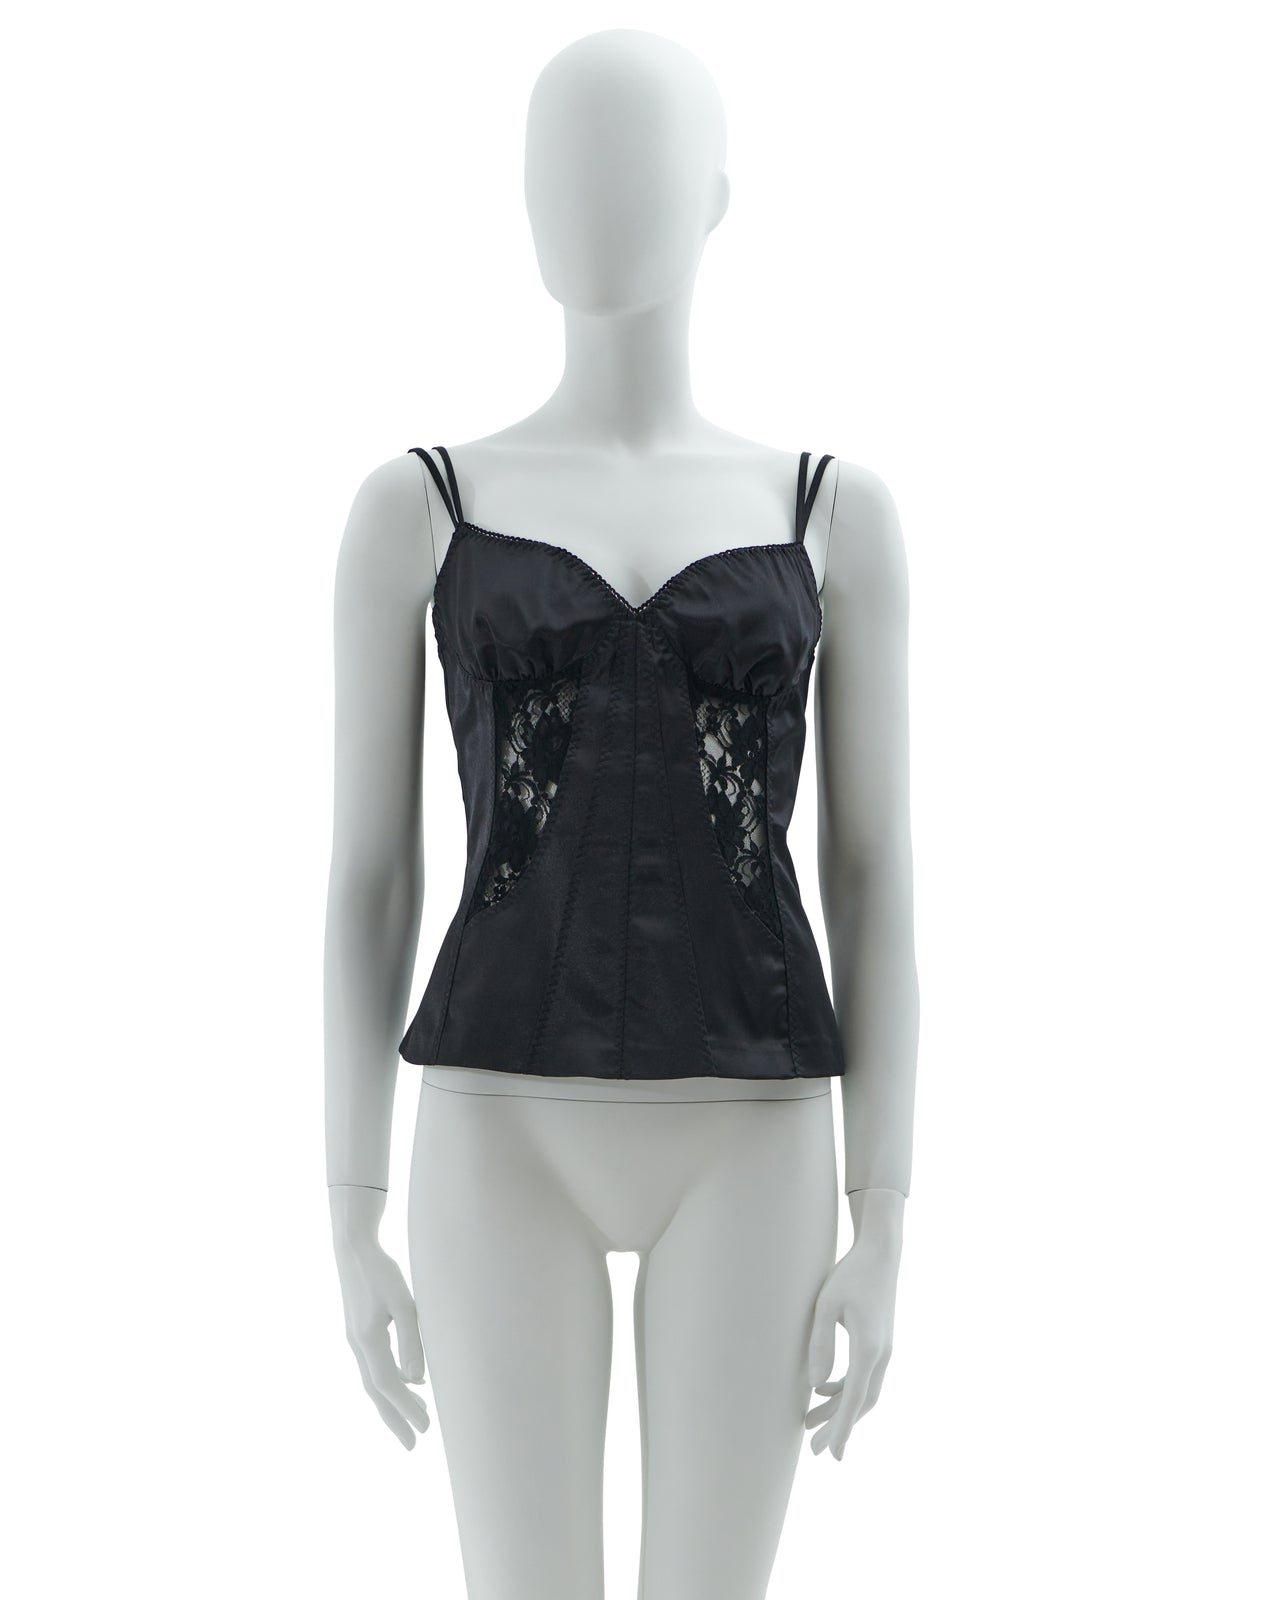 D&G Early 2000s Black satin&lace bustier